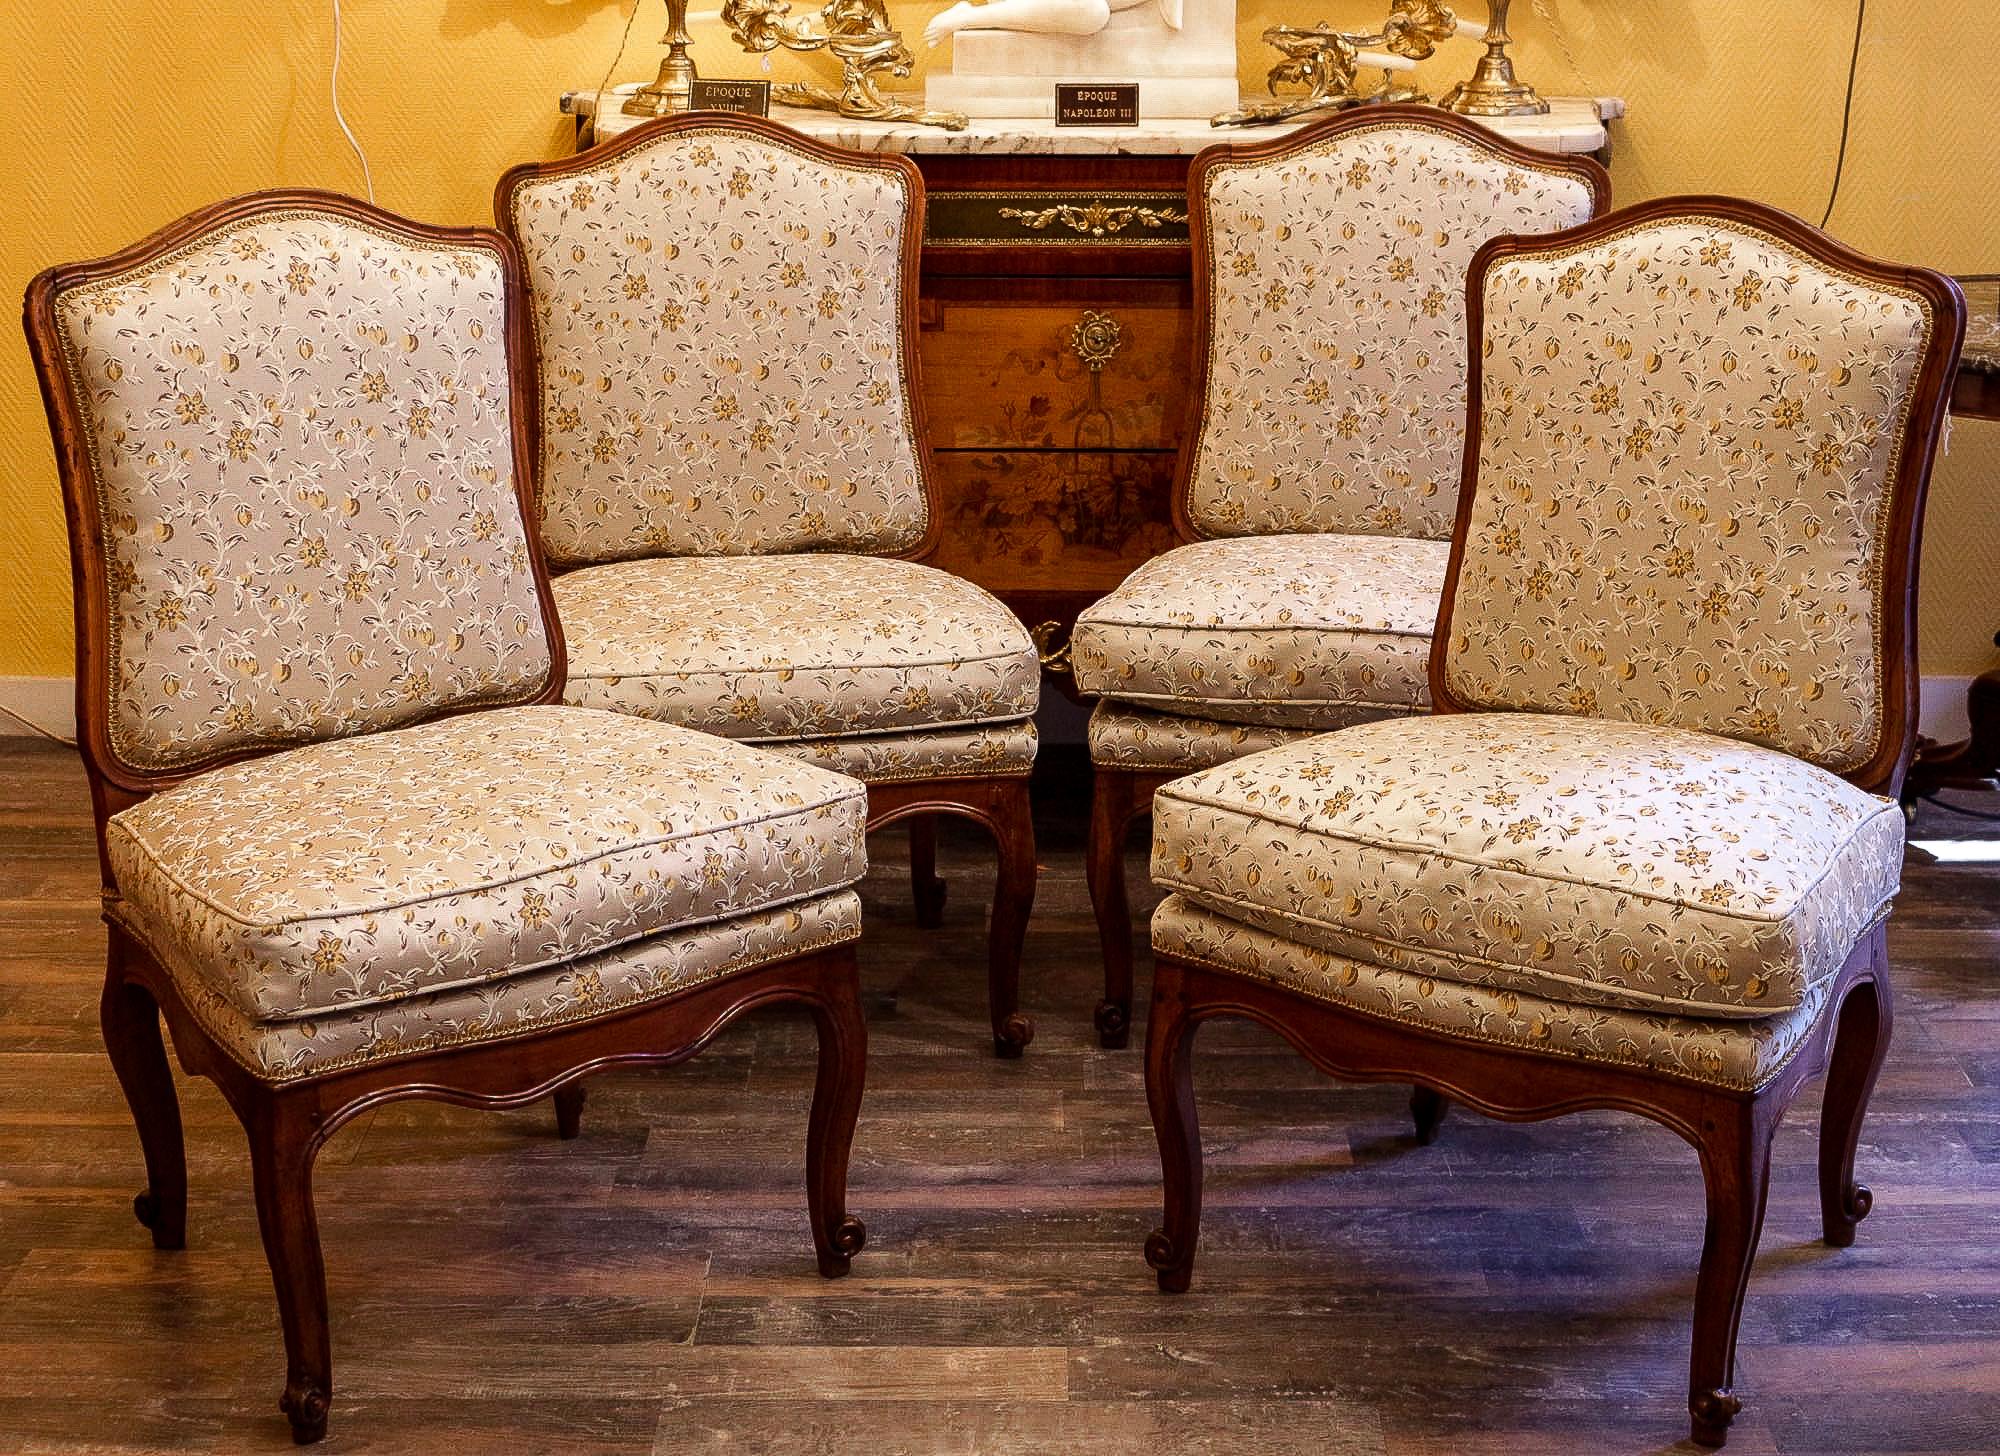 French Regence period, set of four large slipper chairs in walnut, circa 1730.

A large four slipper chairs or “chauffeuses” in walnut, dating from the French Regence period, circa 1730.
Beautiful repeated serpentine forms of the chairs are